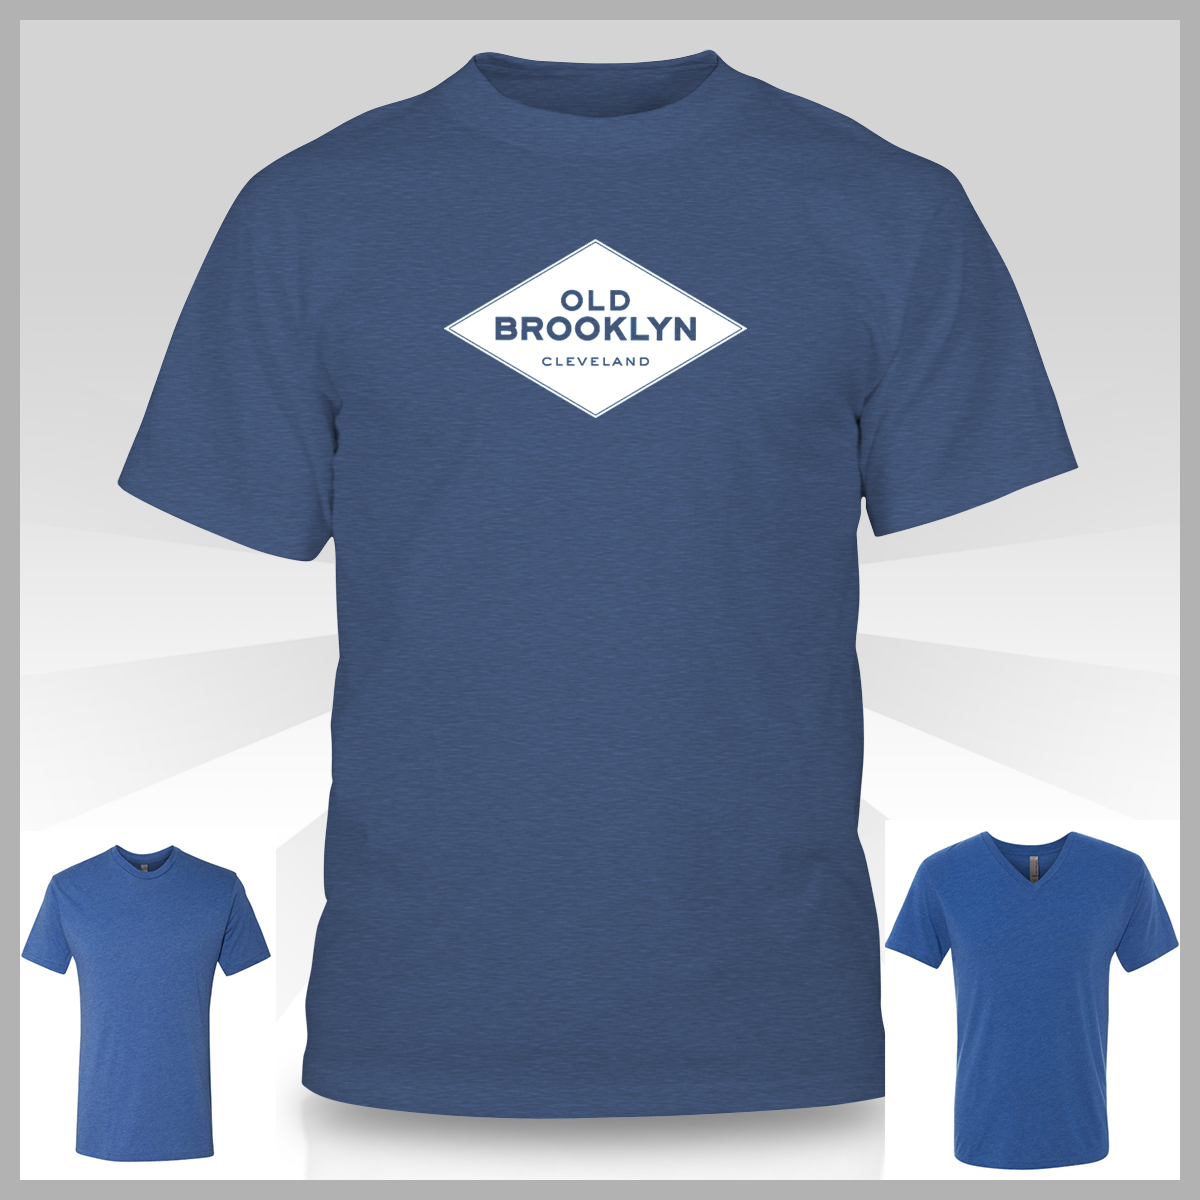 royal blue and white t shirt